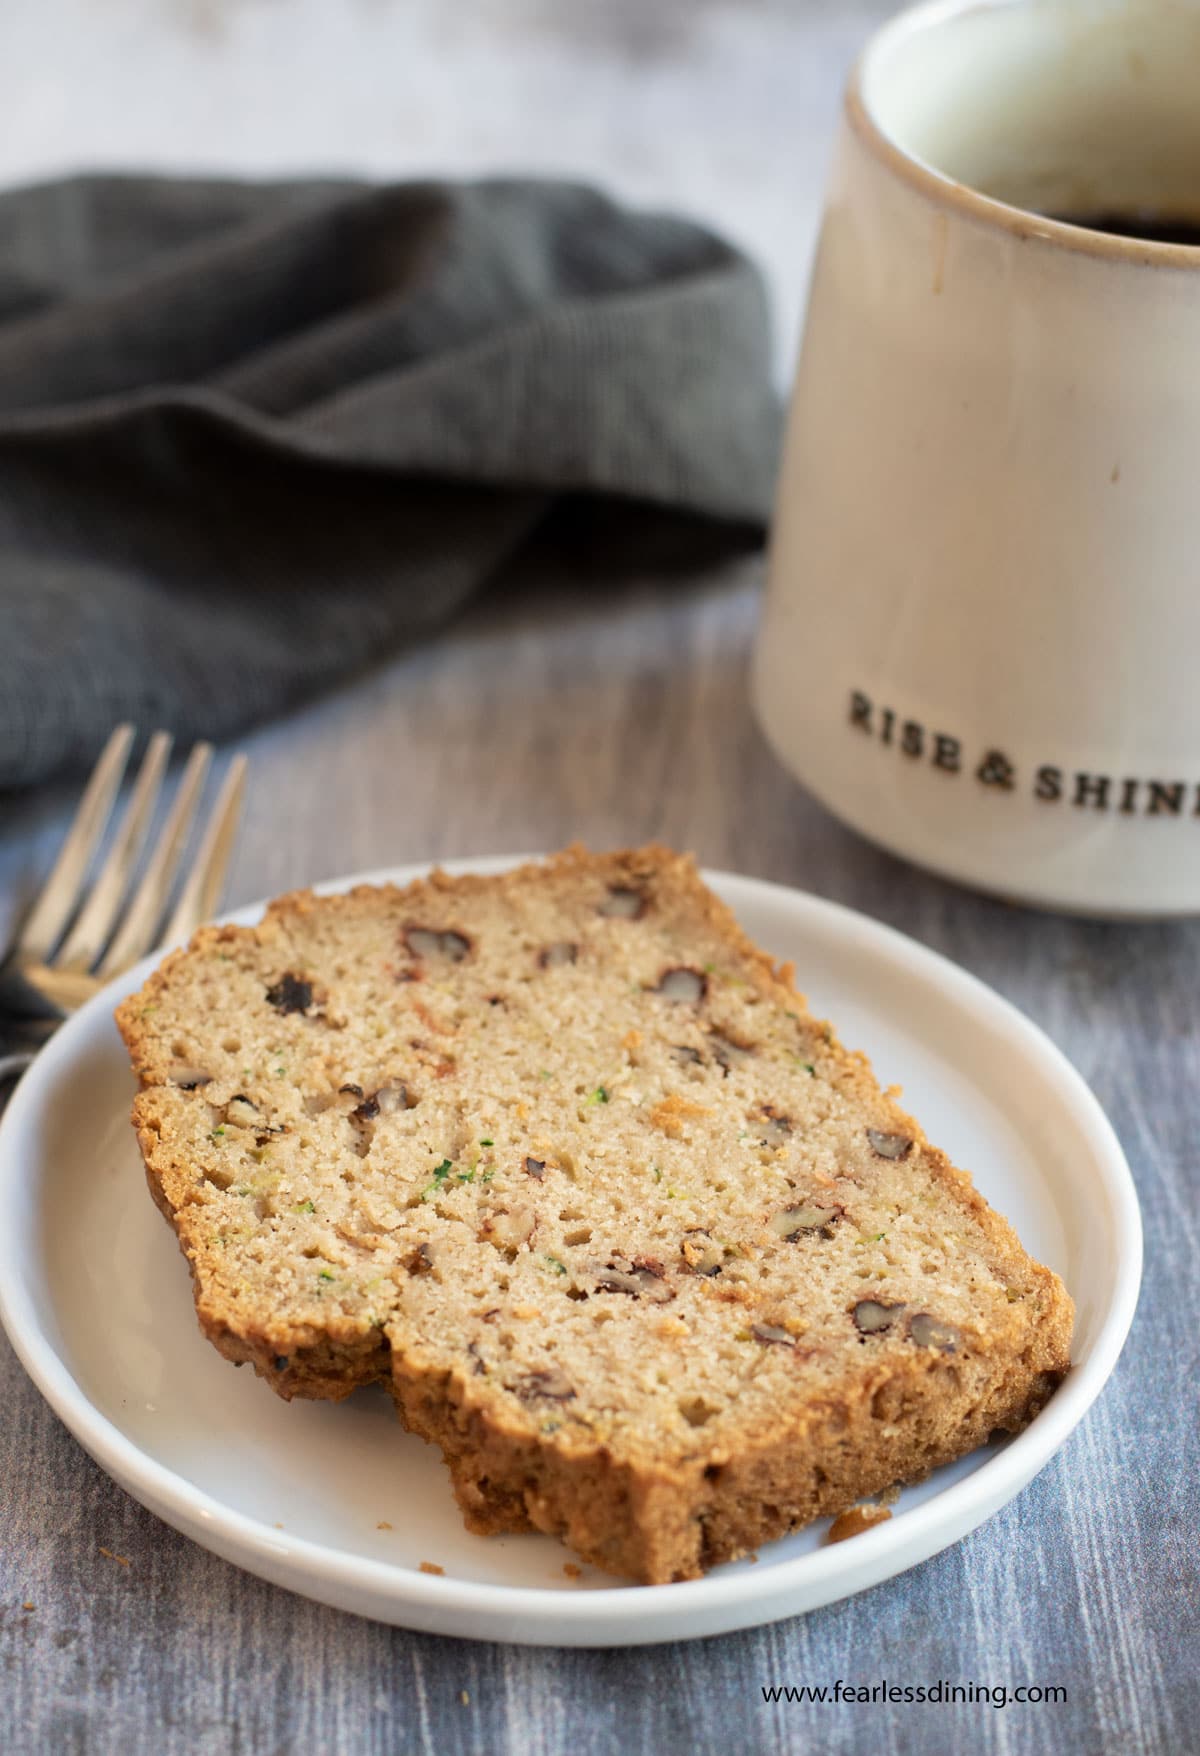 A slice of zucchini bread on a plate next to a mug of coffee.